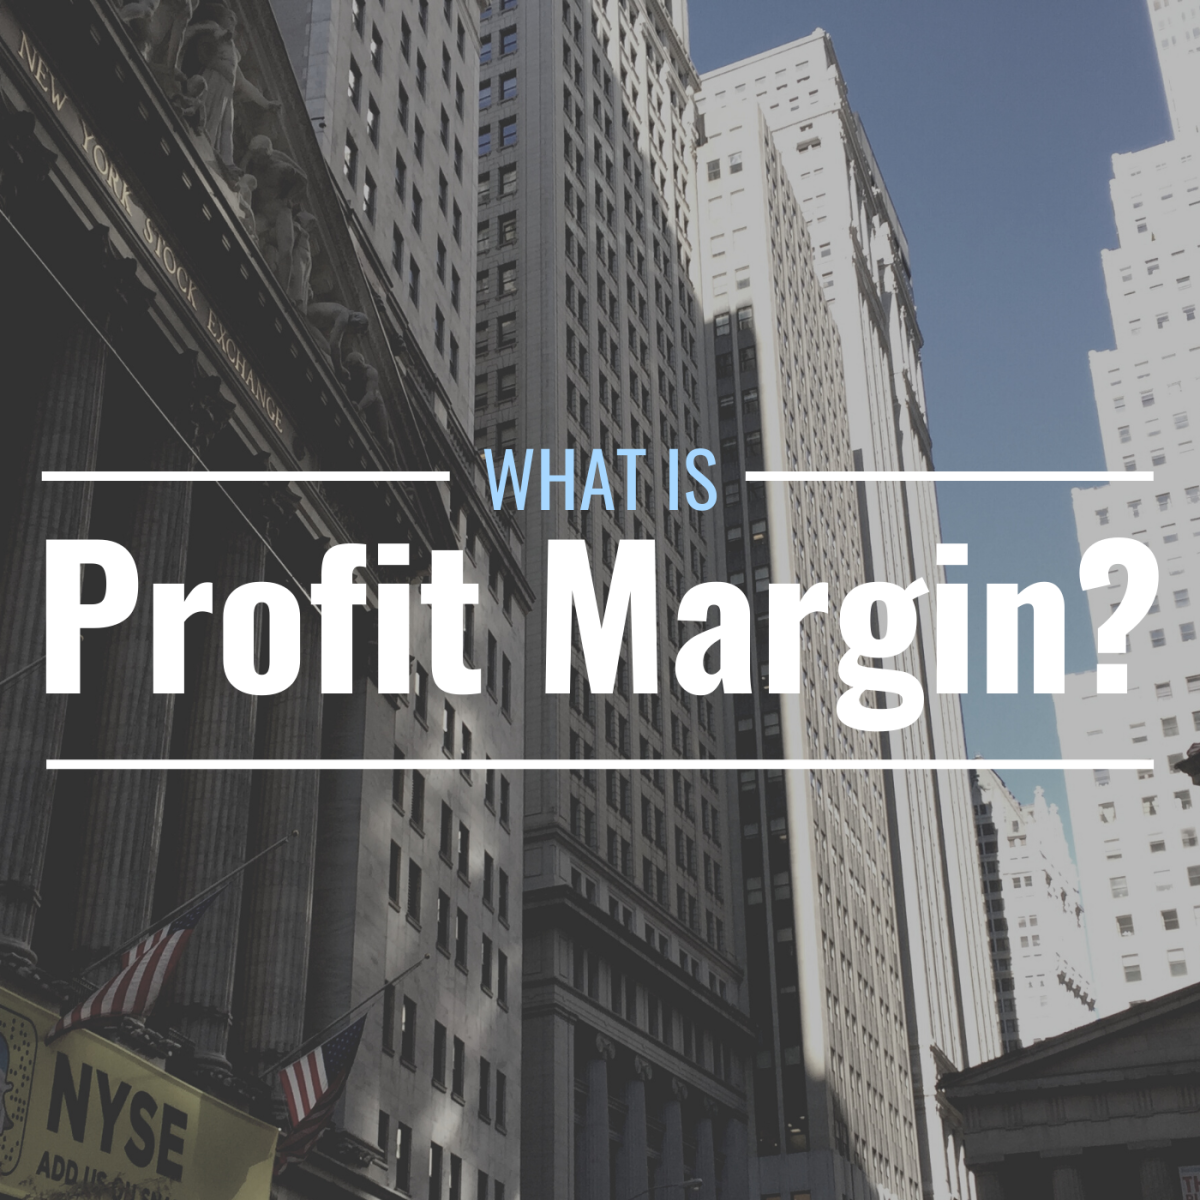 Photo of the New York Stock Exchange and other buildings on Wall Street with text overlay that reads "What Is Profit Margin?"